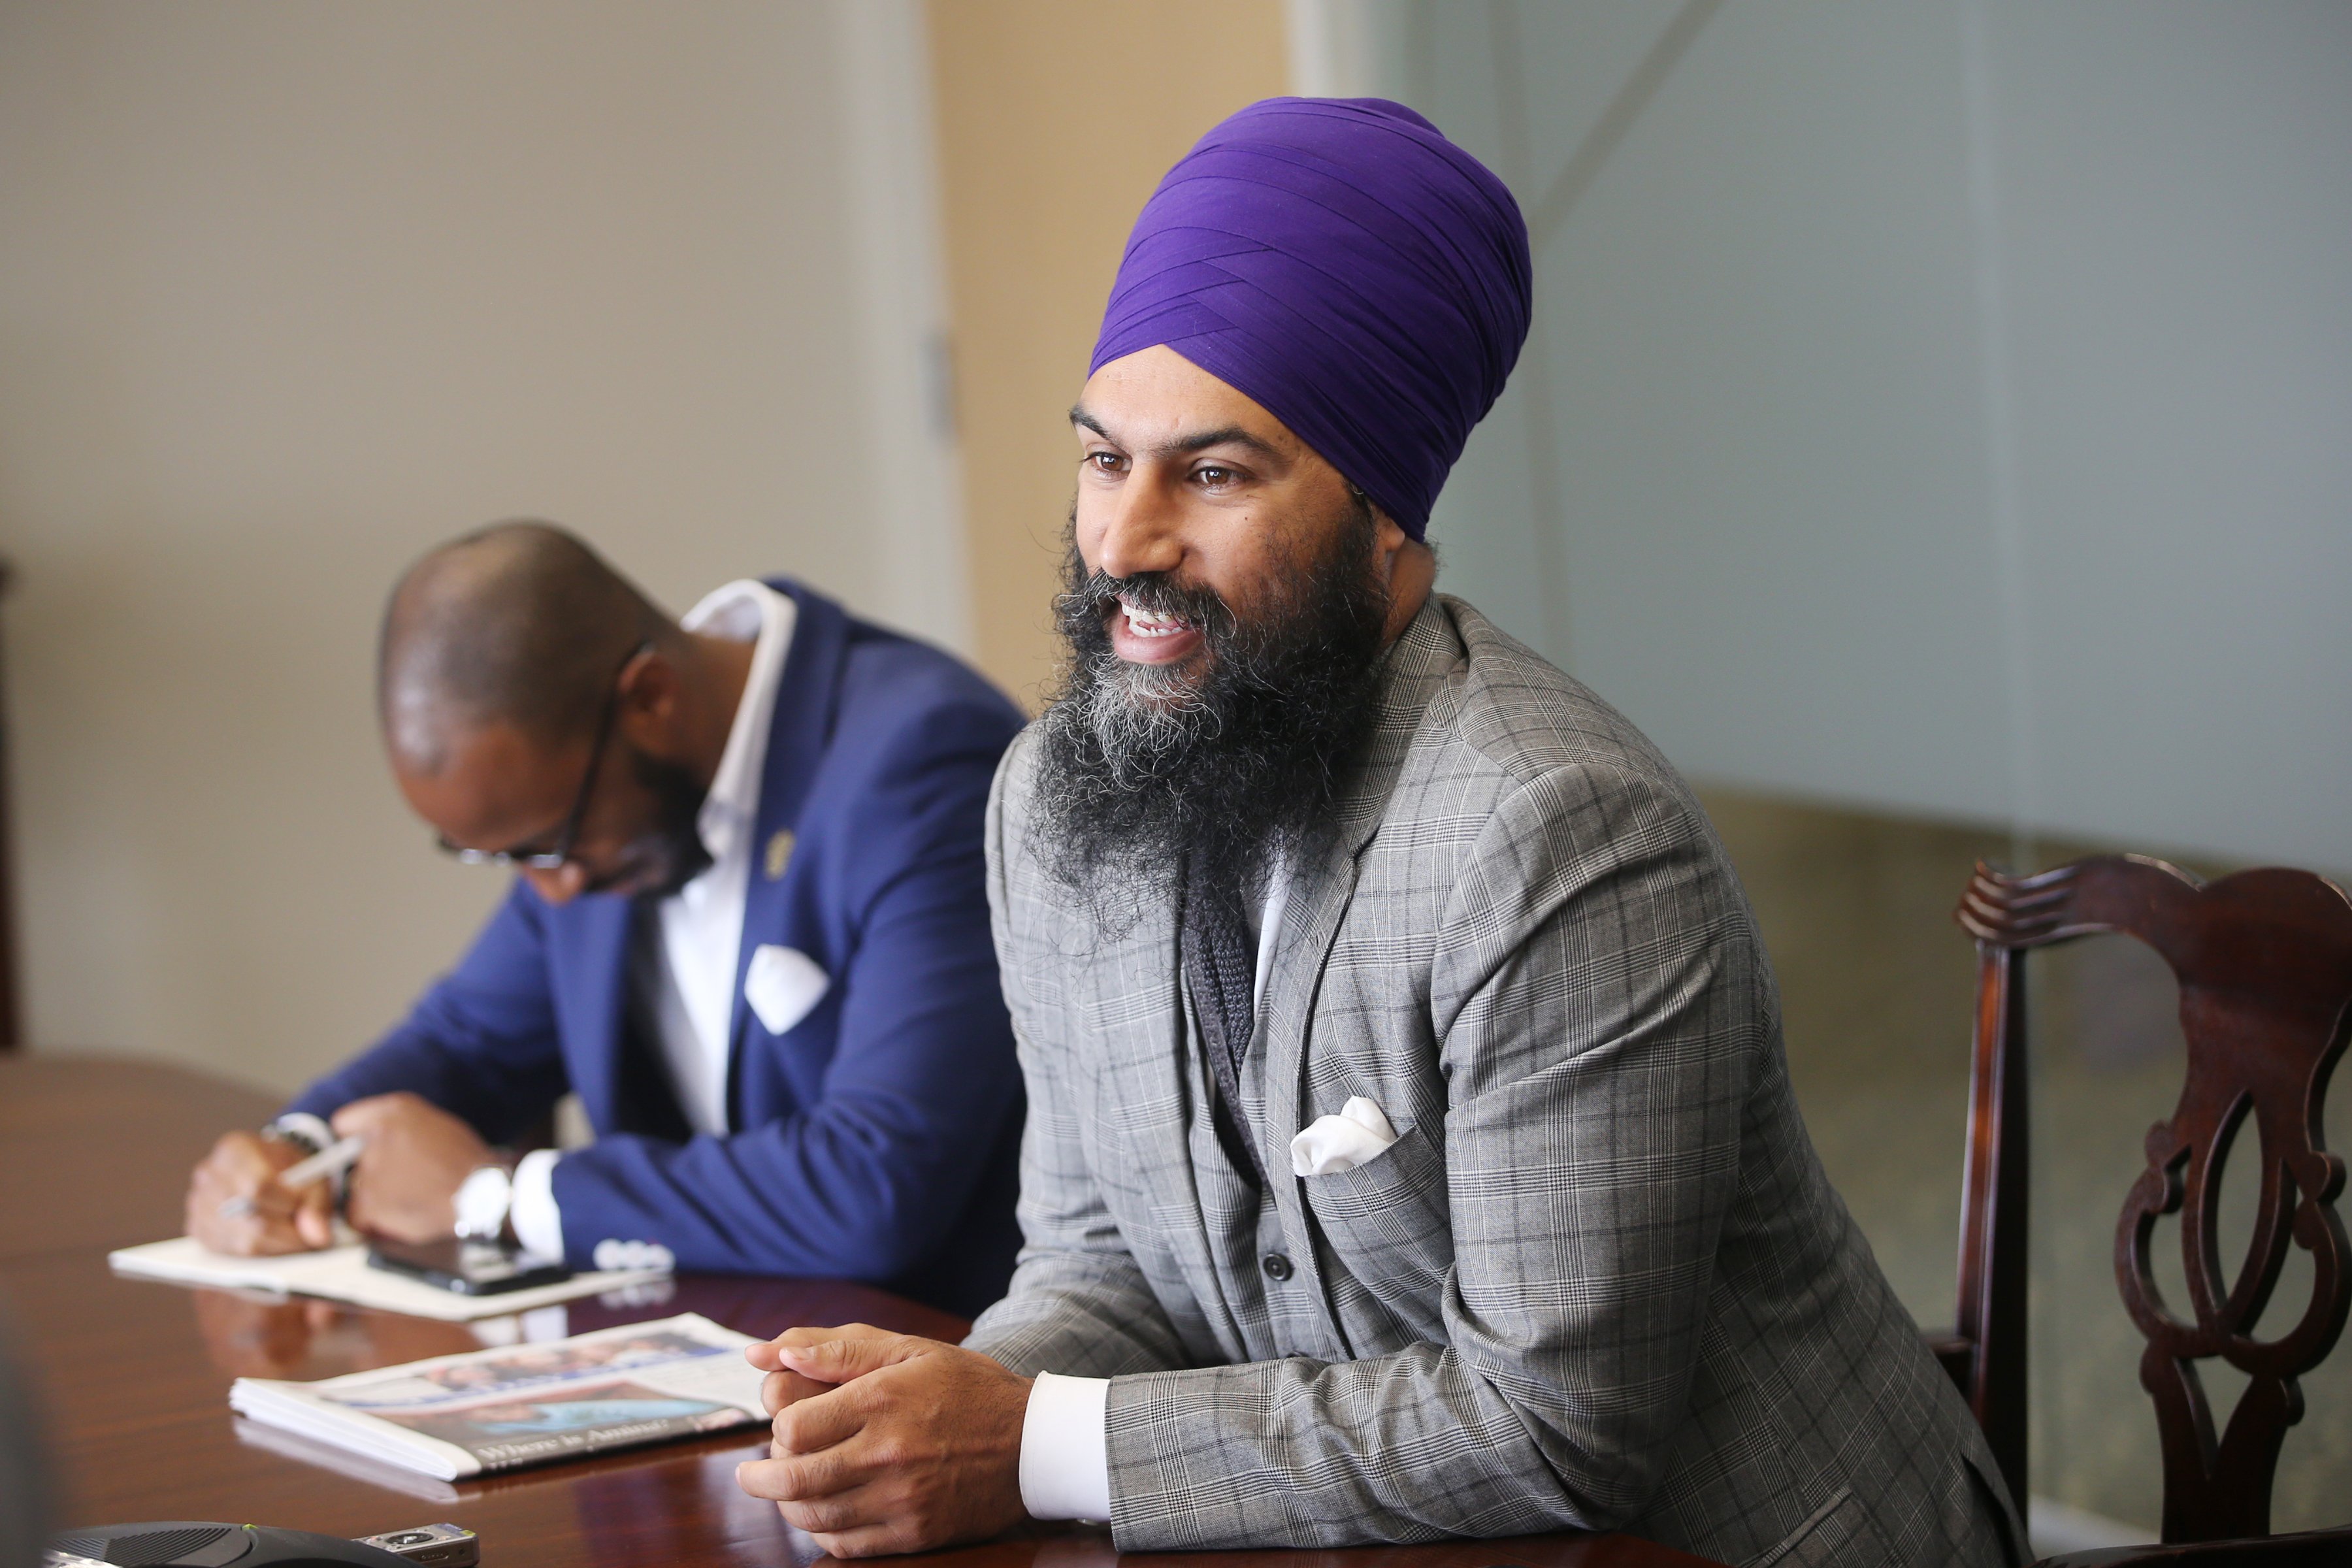 NDP leadership candidate Jagmeet Singh discusses his platform and campaign. (Vince Talotta—Toronto Star/Getty Images)